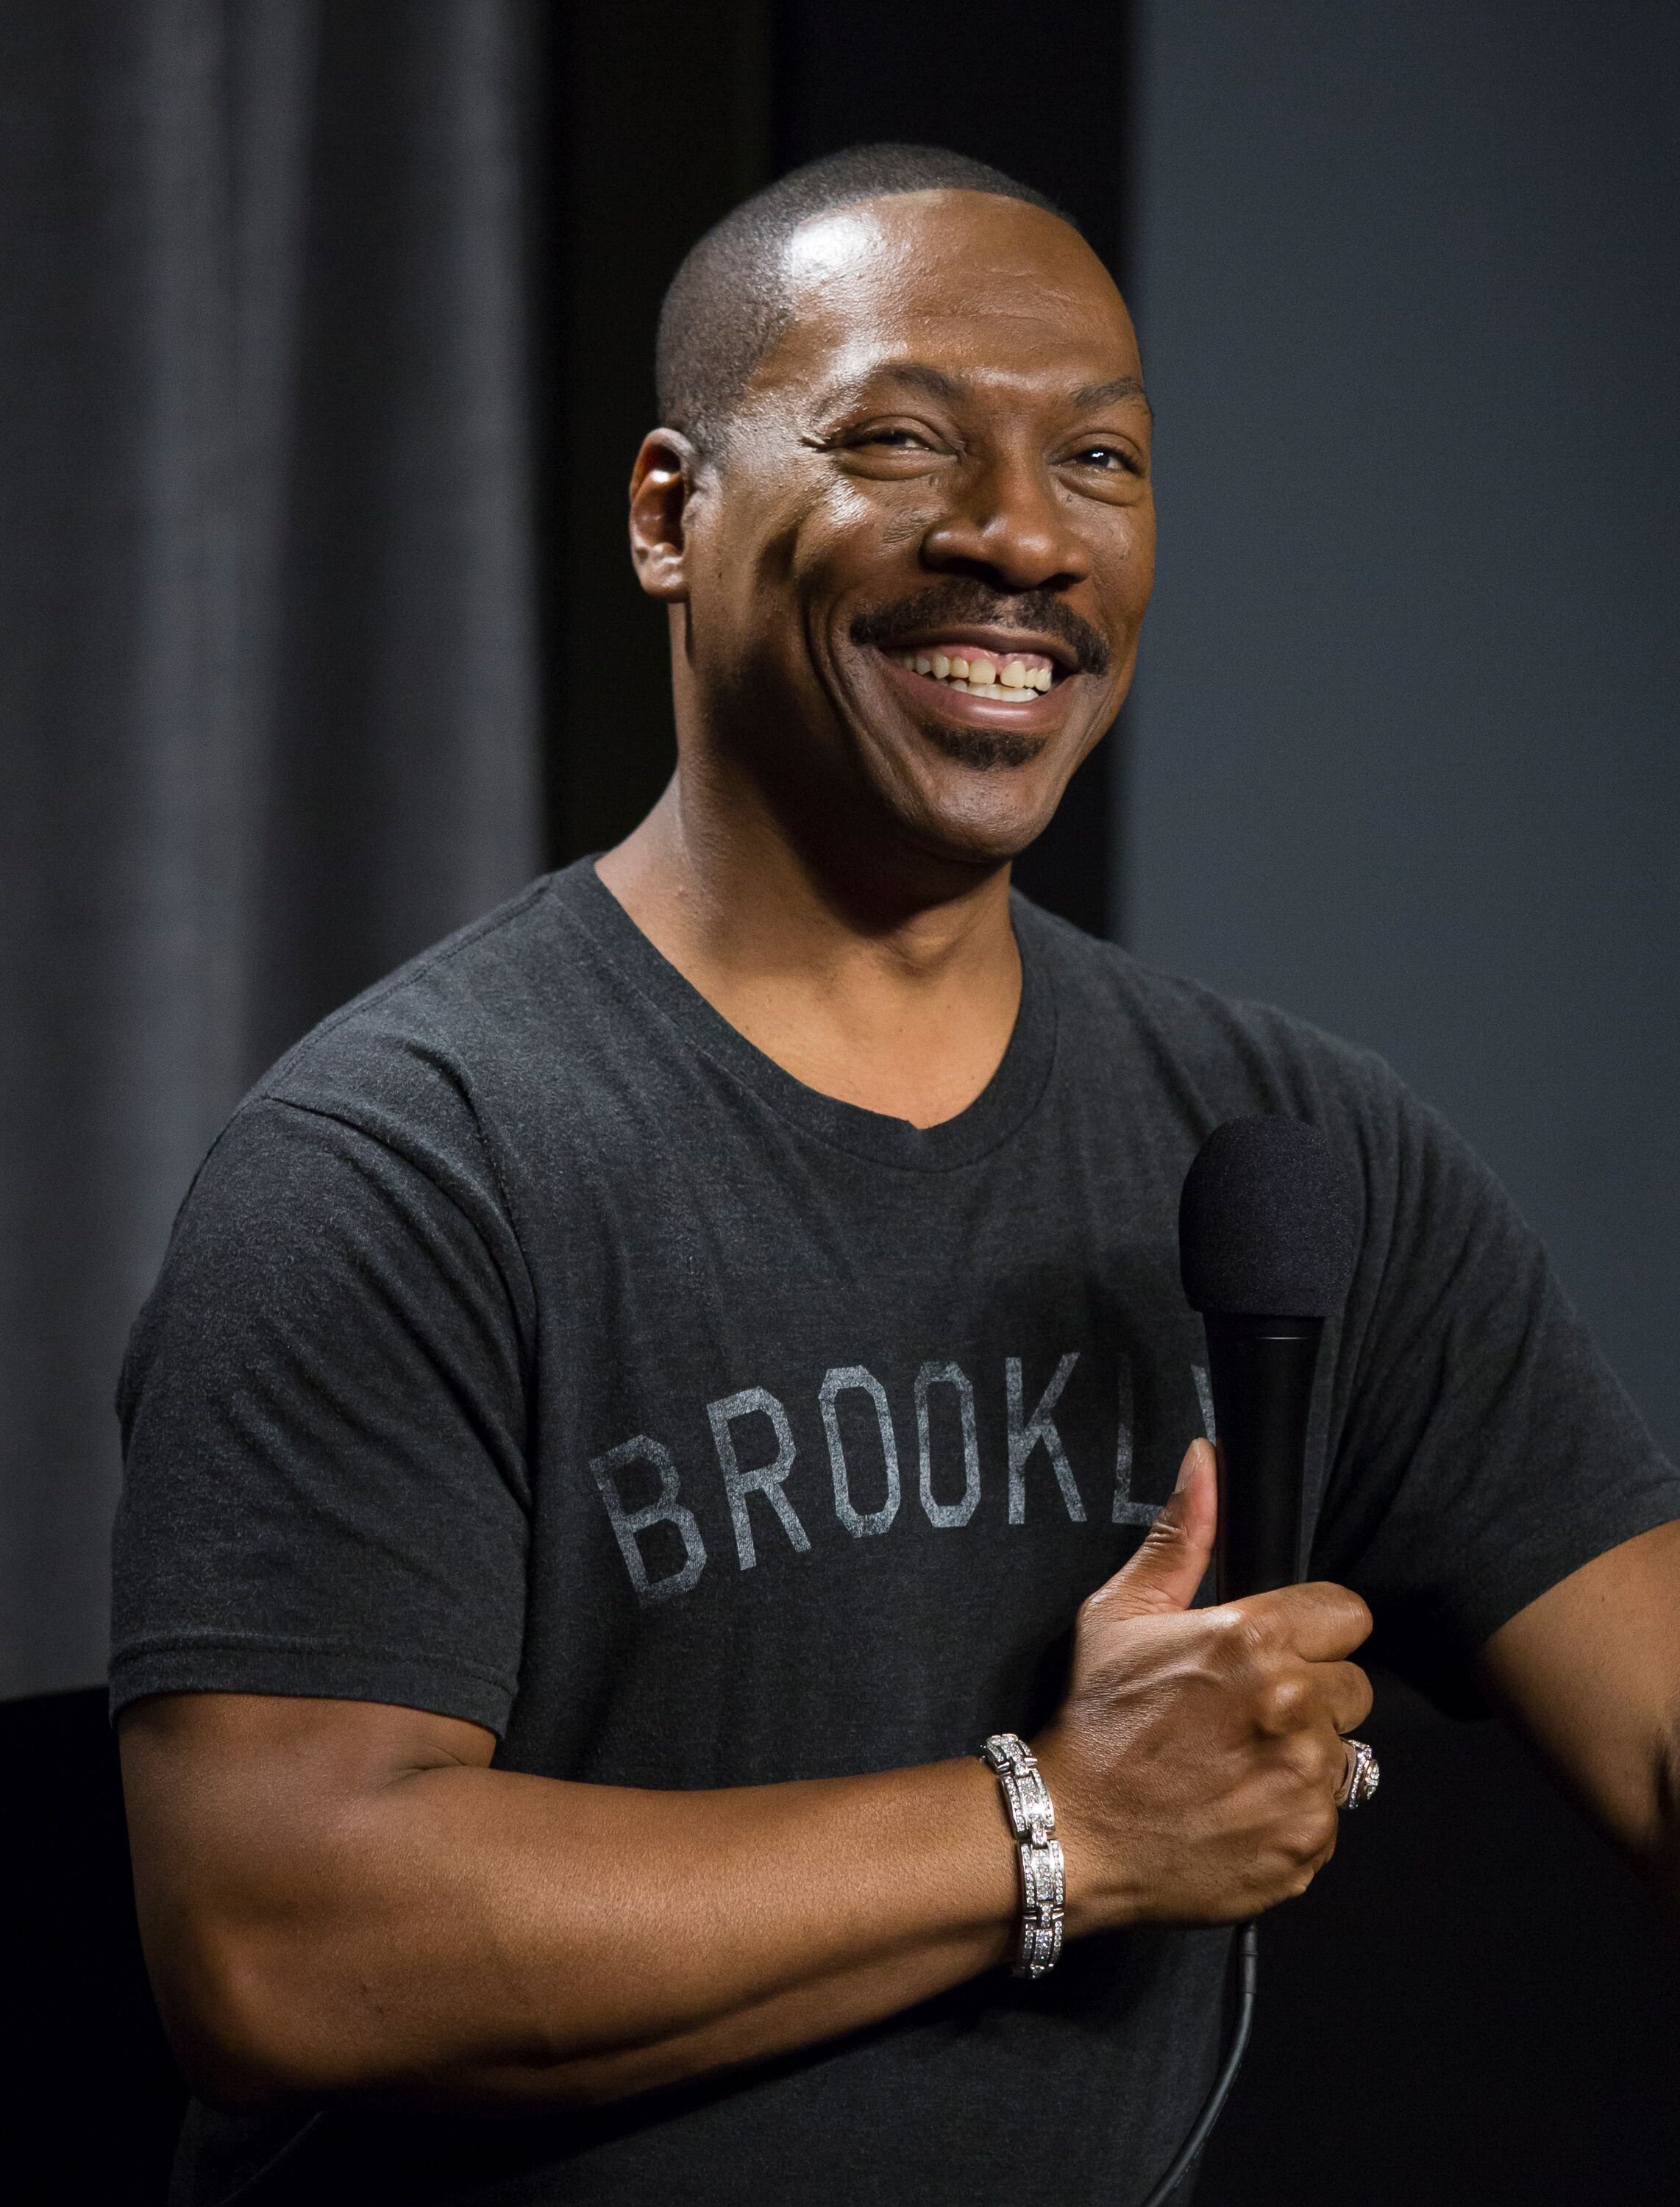 Eddie Murphy at SAG-AFTRA Foundation's Conversations with "Mr. Church" at SAG Foundation Actors Center. | Source: Getty Images